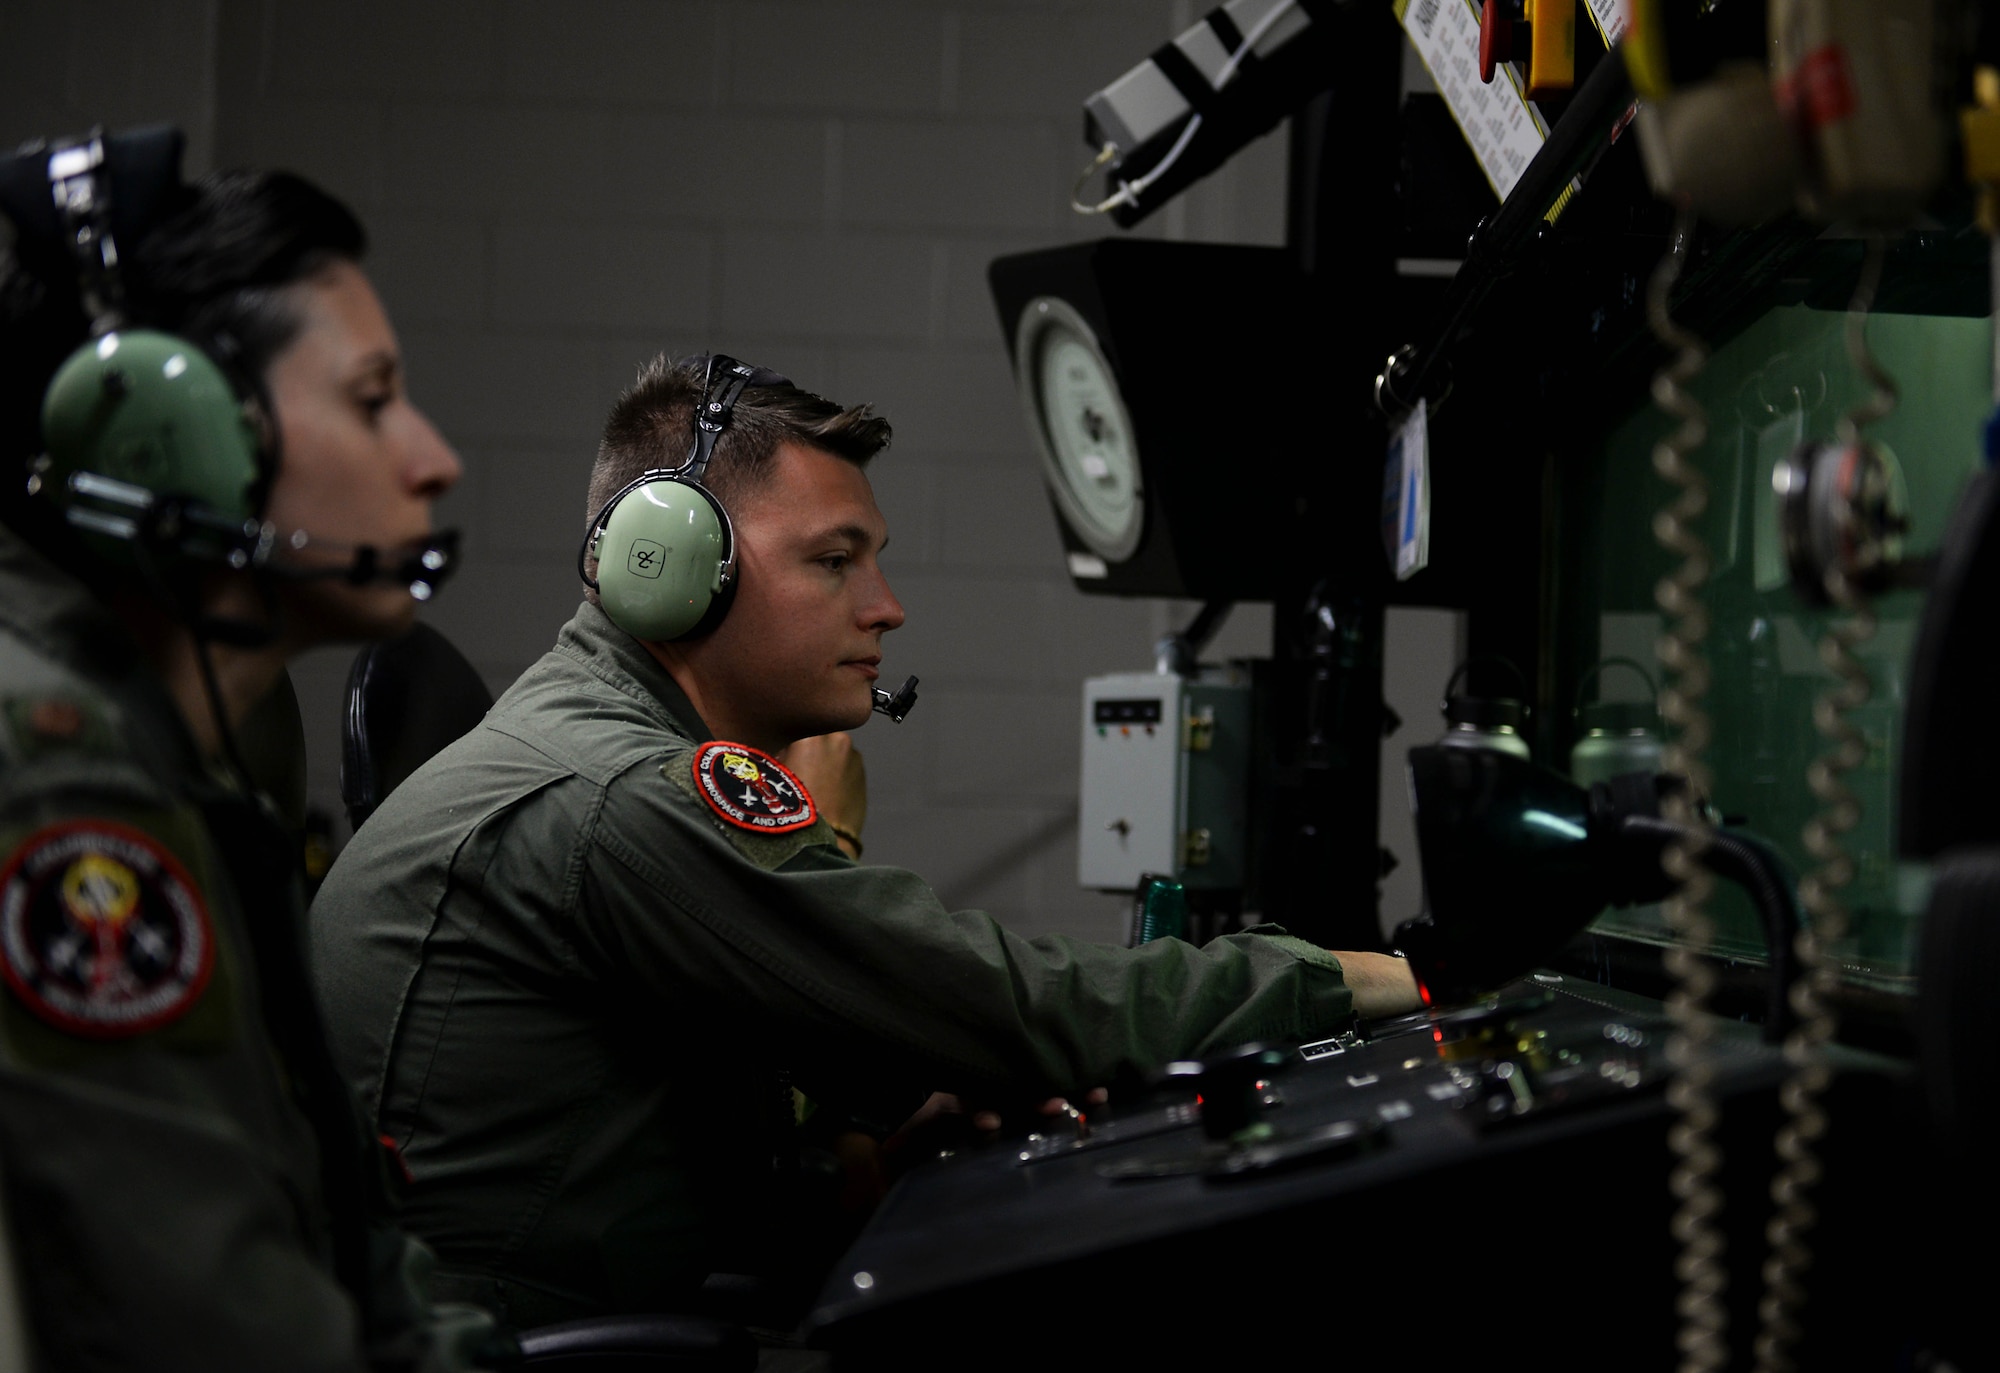 Senior Airman Taylor Carroll, 14th Operational Medical Readiness Squadron’s Aerospace and Operational Physiology Flight technician, ensure the Airmen are aware of what’s going on inside the simulated chamber flight Sept. 3, 2019, in the Hyperbaric Chamber Room on Columbus Air Force Base, Miss. AOP is responsible for teaching pilots and aircrews the essential skills they need to handle in-flight emergencies through various training such as aircraft pressurization, night vision, emergency first aid, oxygen equipment, physiological effects of altitude and emergency escape from aircraft. (U.S. Air Force photo by Airman 1st Class Hannah Bean)